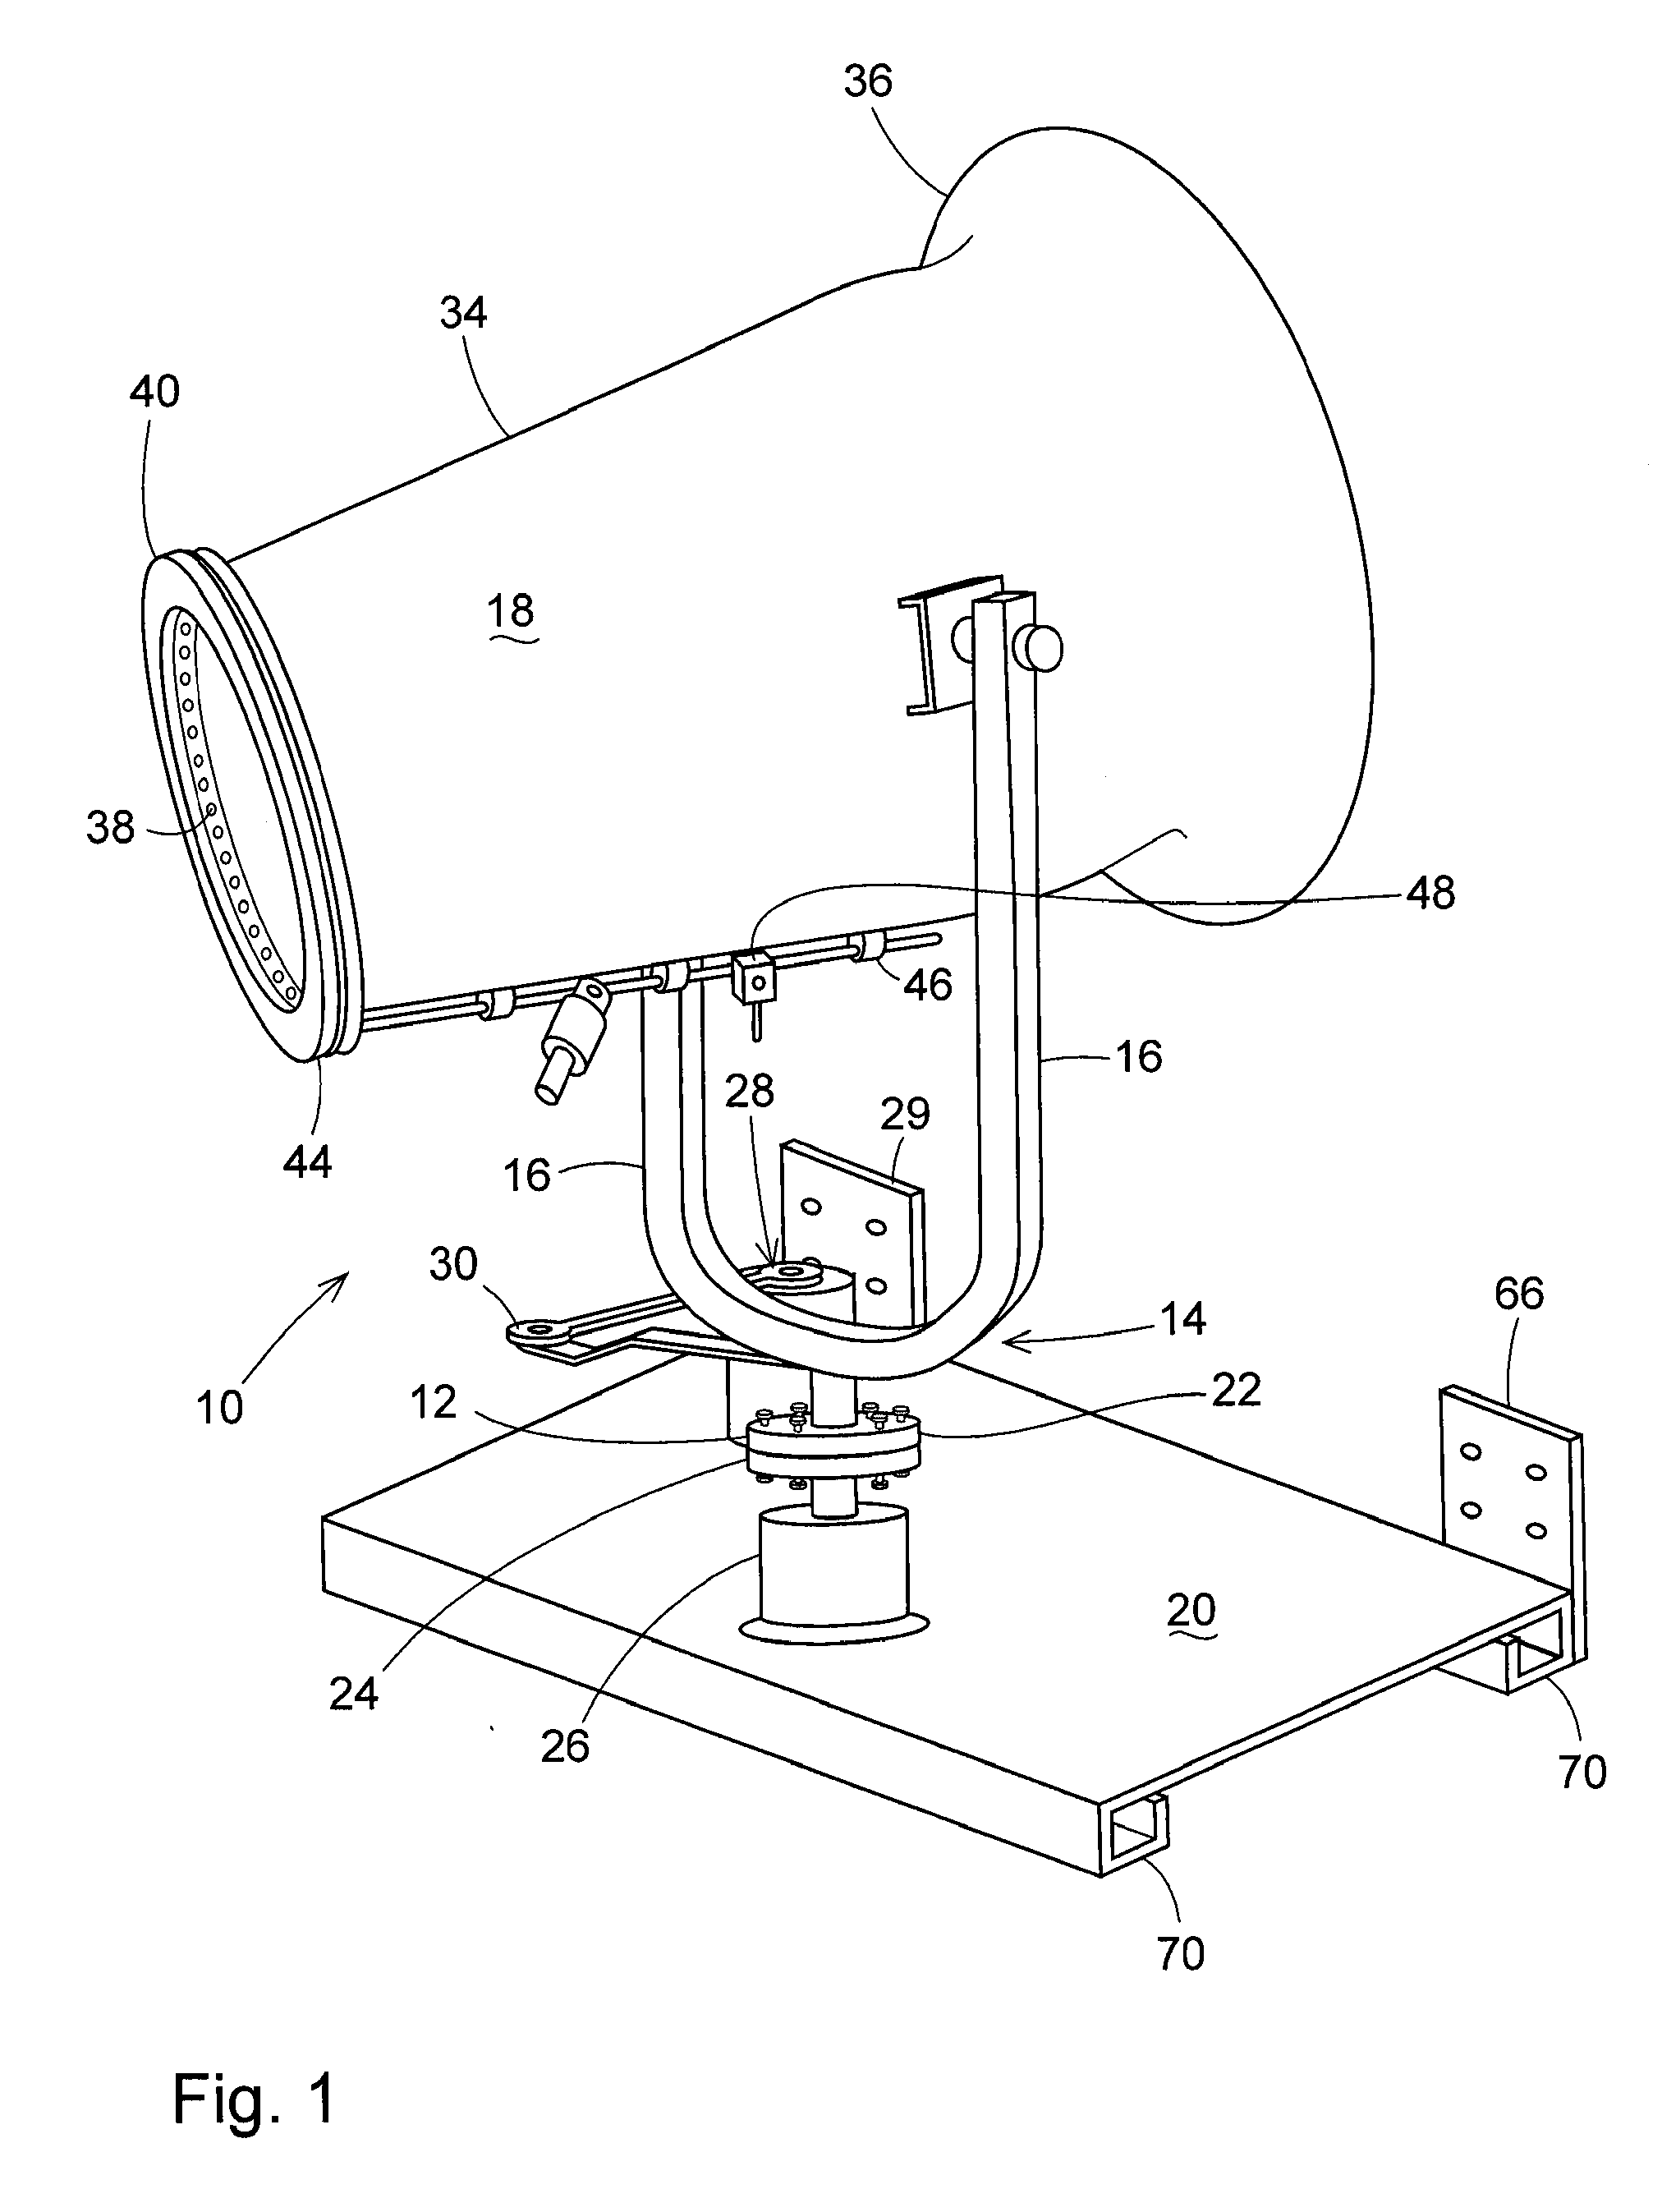 Method for Attaching a Blower Unit to Industrial Equipment and Apparatus Used Therewith and Methods for Using the Same